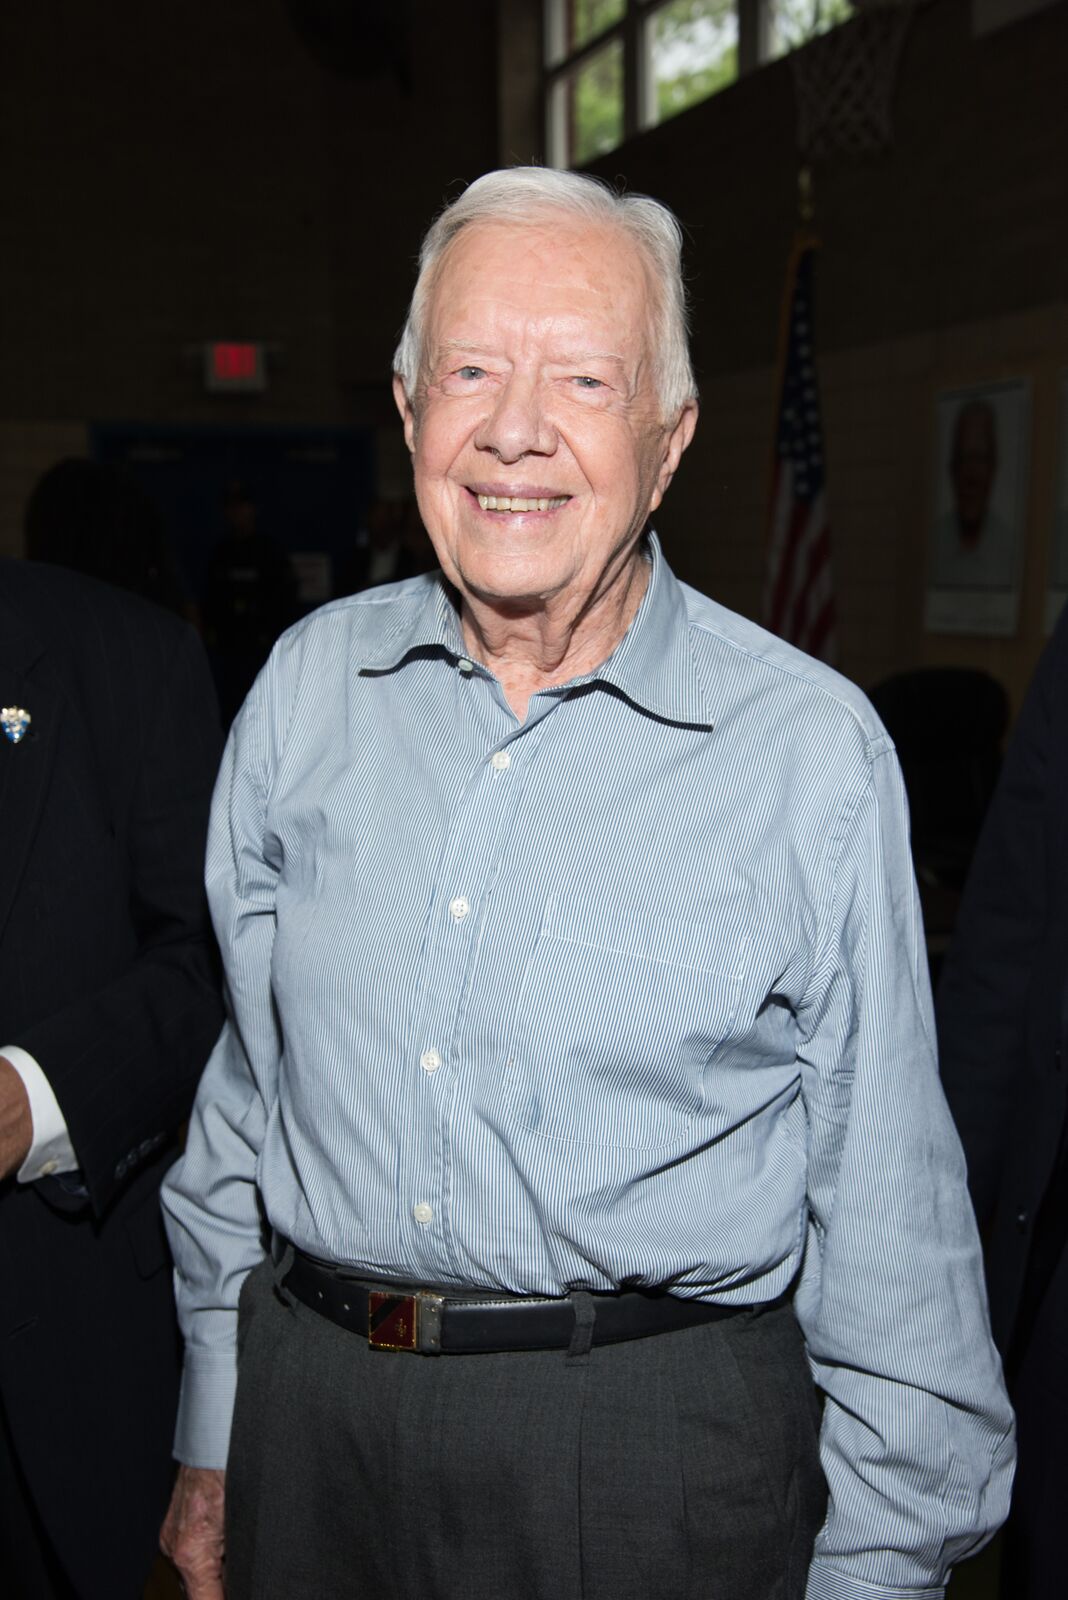 Former President of the United States Jimmy Carter signs copies of "A Full Life Reflections At Ninety" at Bookends Bookstore on July 8, 2015 in Ridgewood, New Jersey | Photo: Getty Images